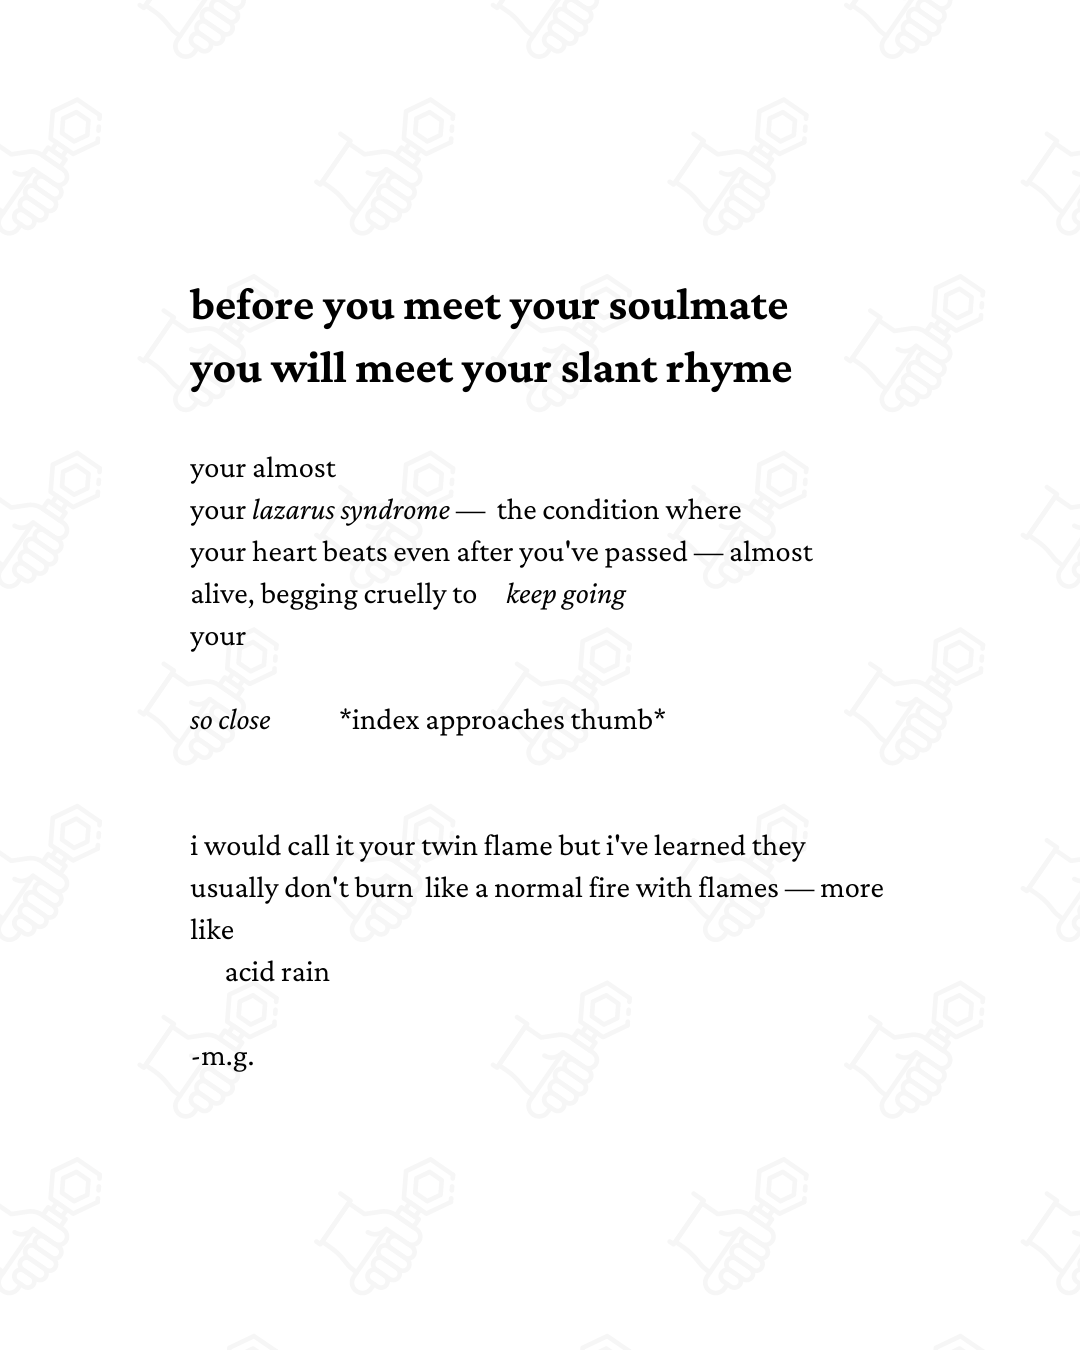 "before you meet your soulmate you will meet your slant rhyme"